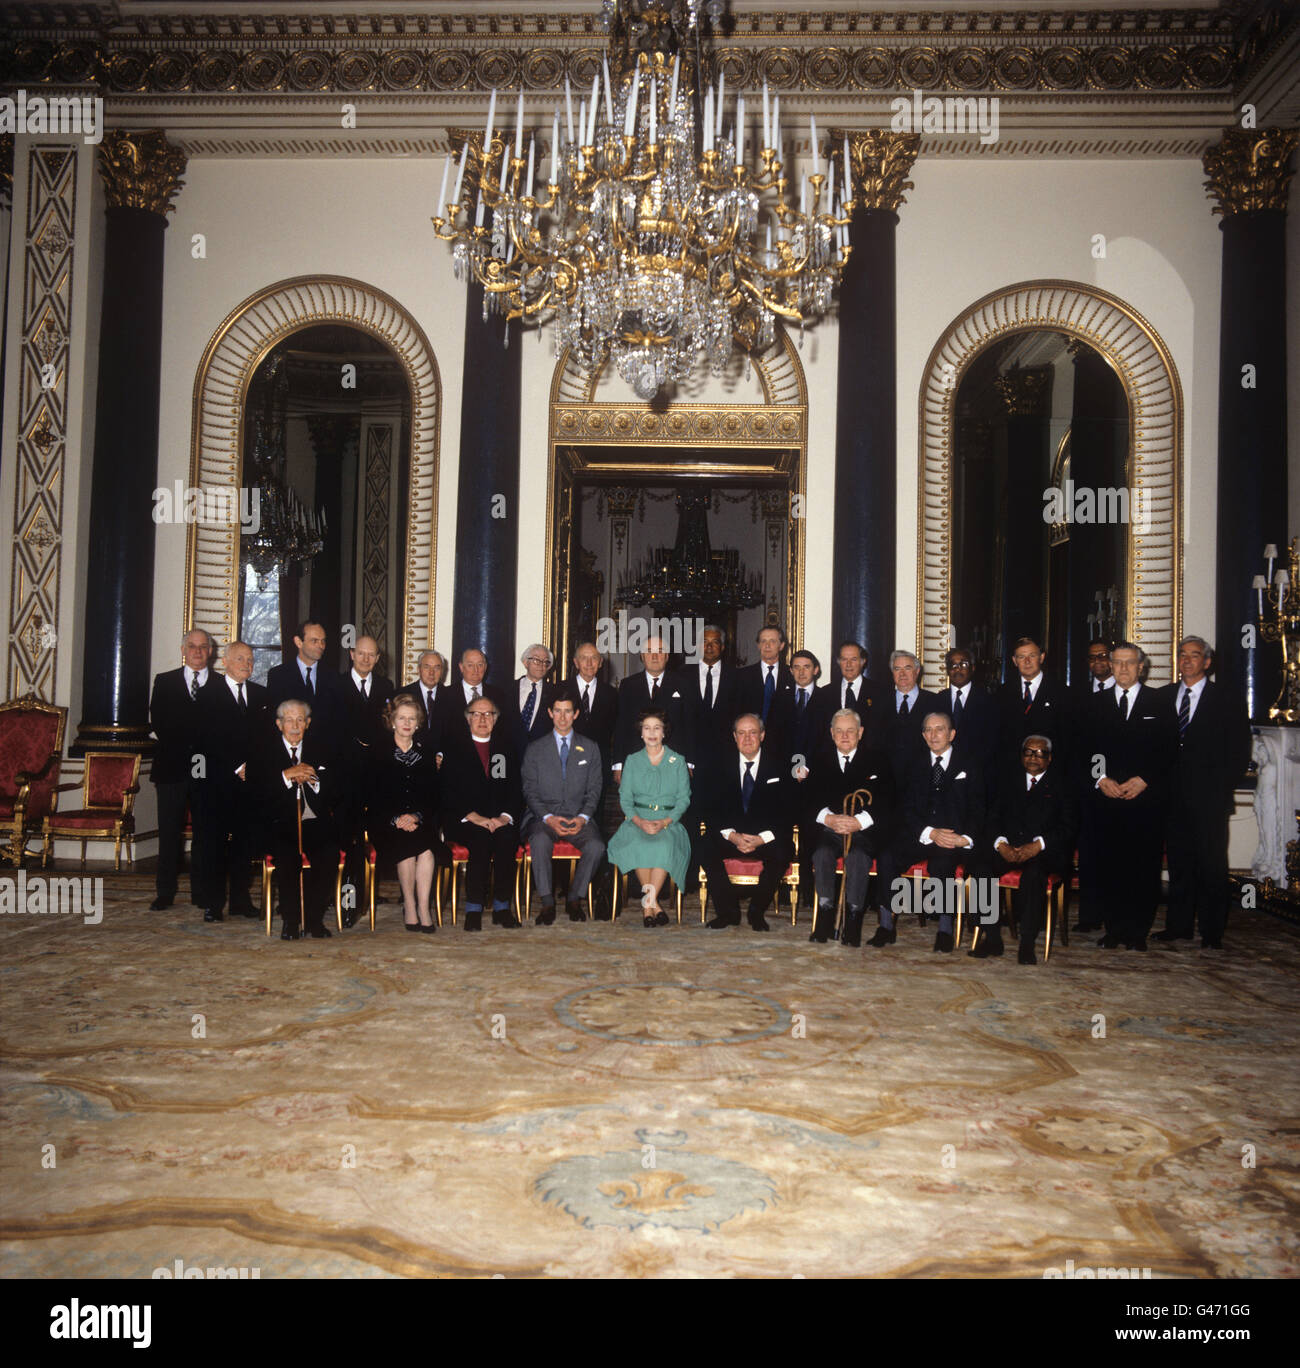 Royalty - Queen Elizabeth II and the Privy Council - Buckingham Palace, London Stock Photo